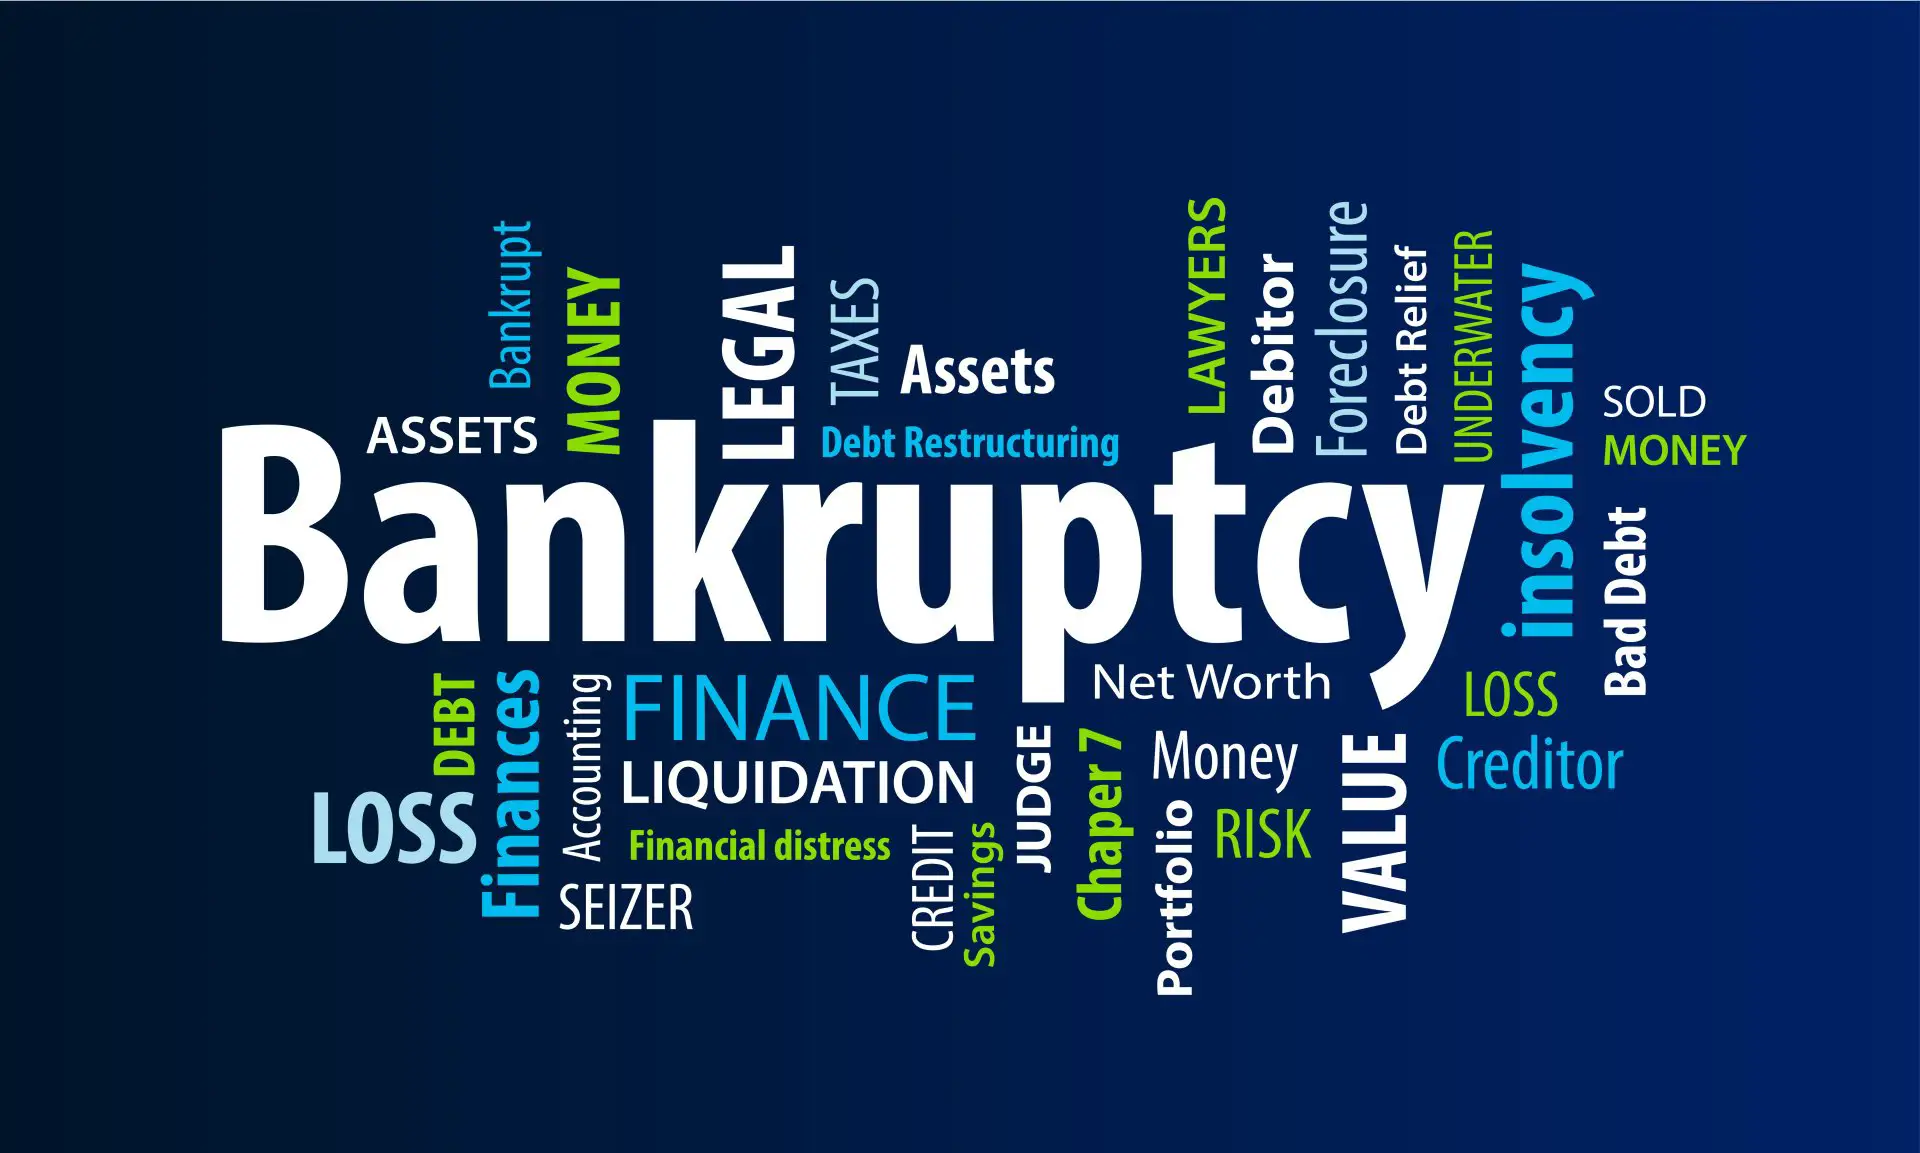 Business Bankruptcies Finally Dropping